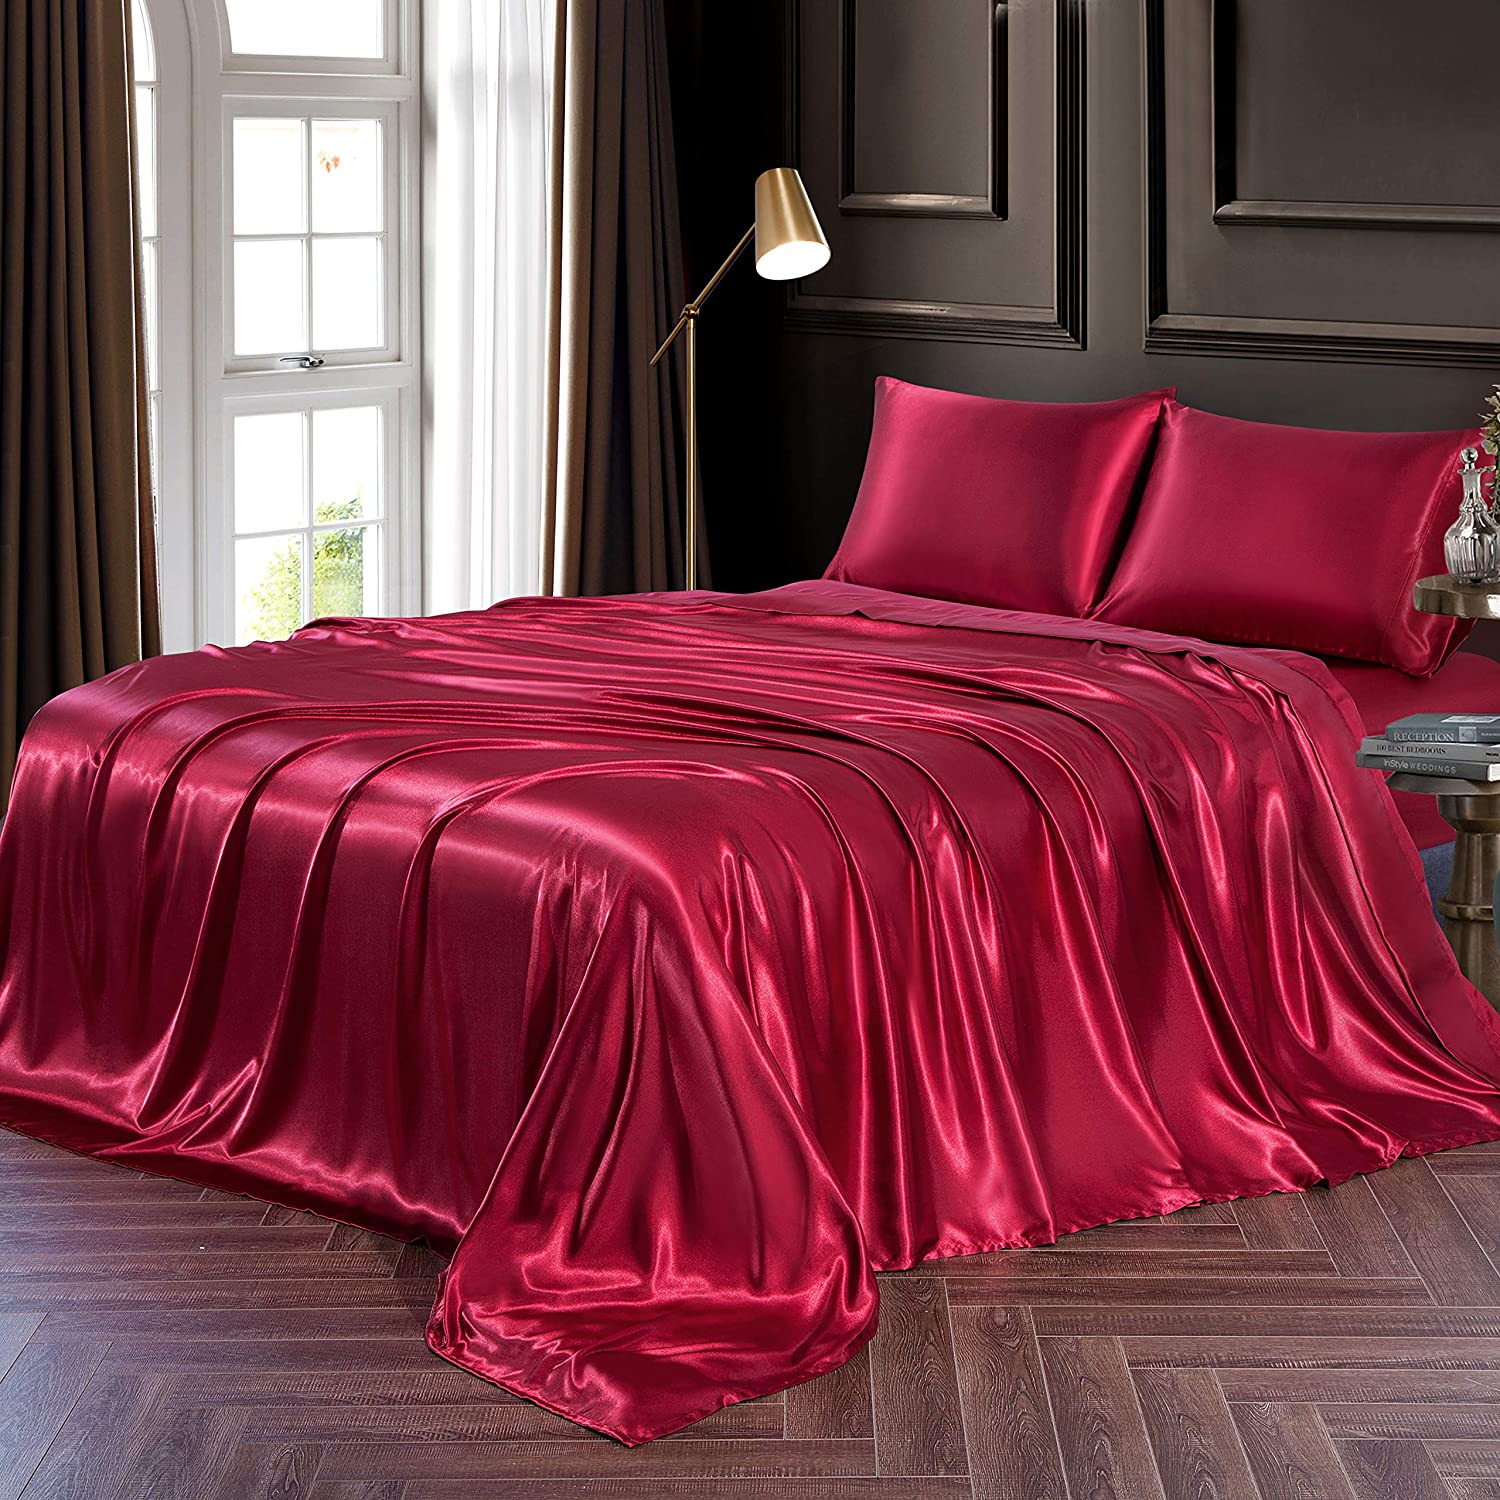 Wri Details about   Chvonttow 4 Piece Satin Sheets Queen Size Luxury Silky Satin Bed Sheets Set 